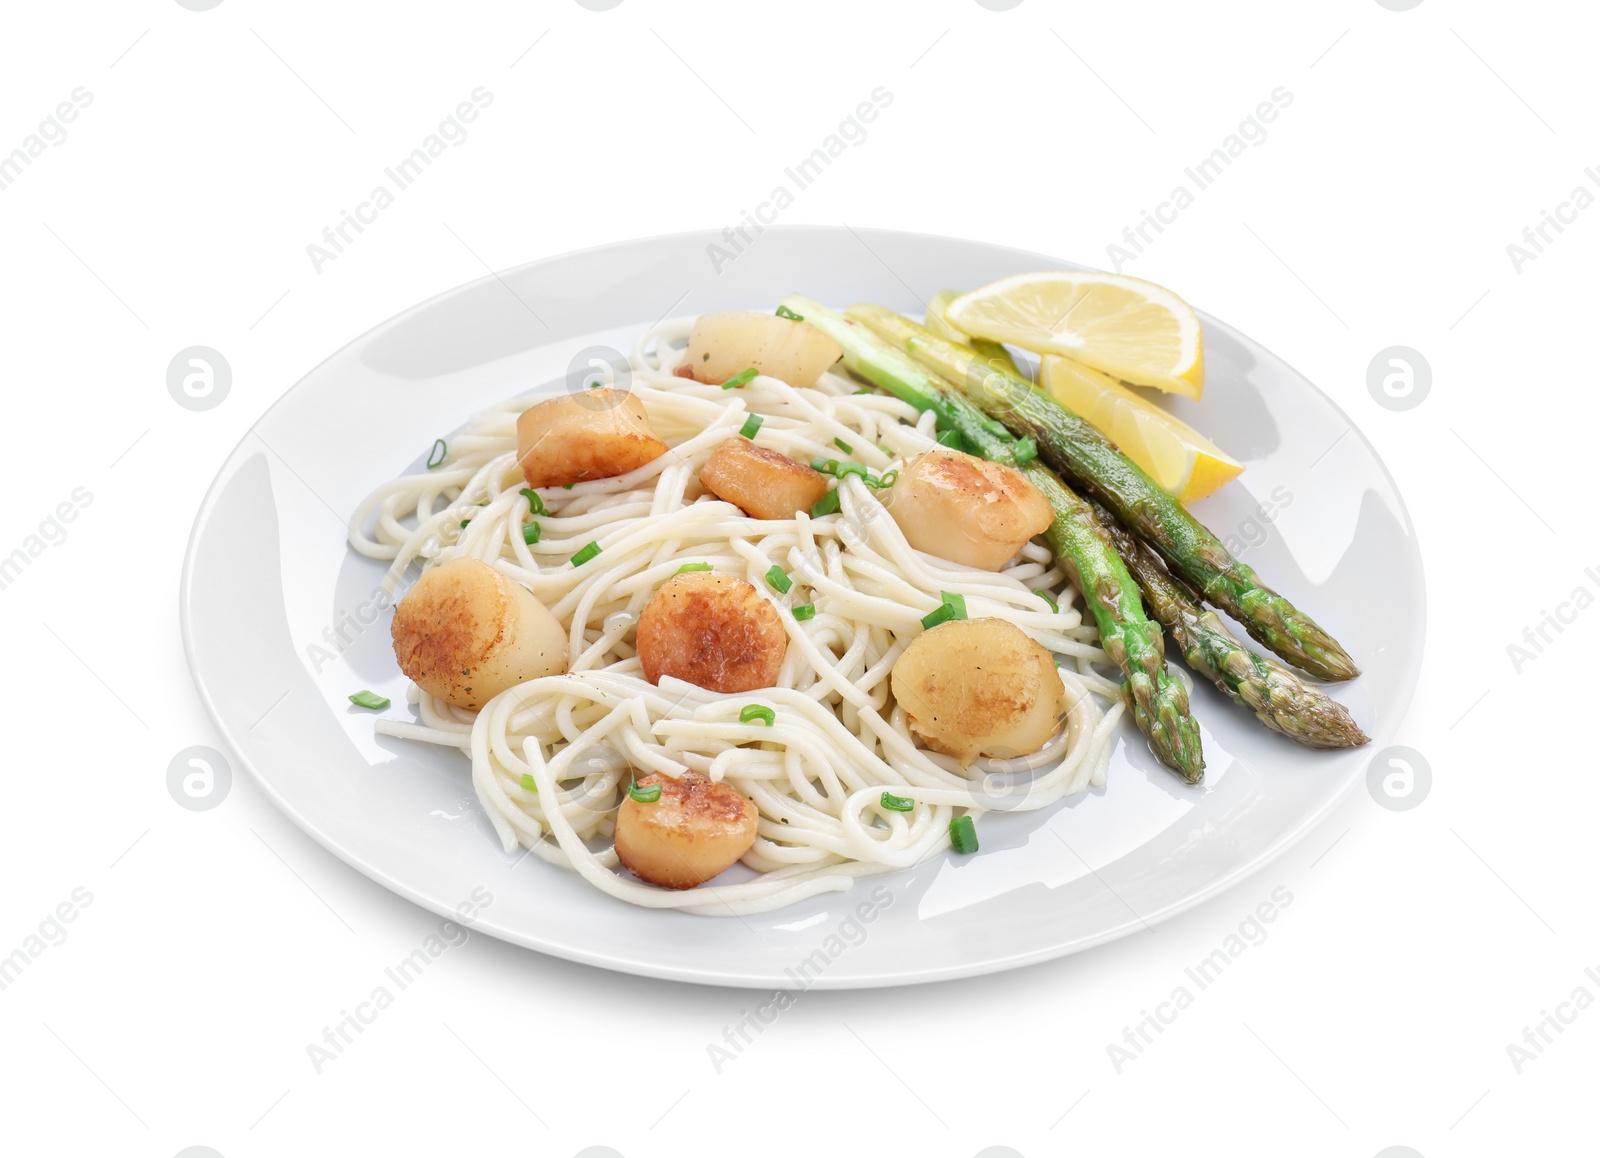 Photo of Delicious scallop pasta with asparagus, green onion and lemon isolated on white